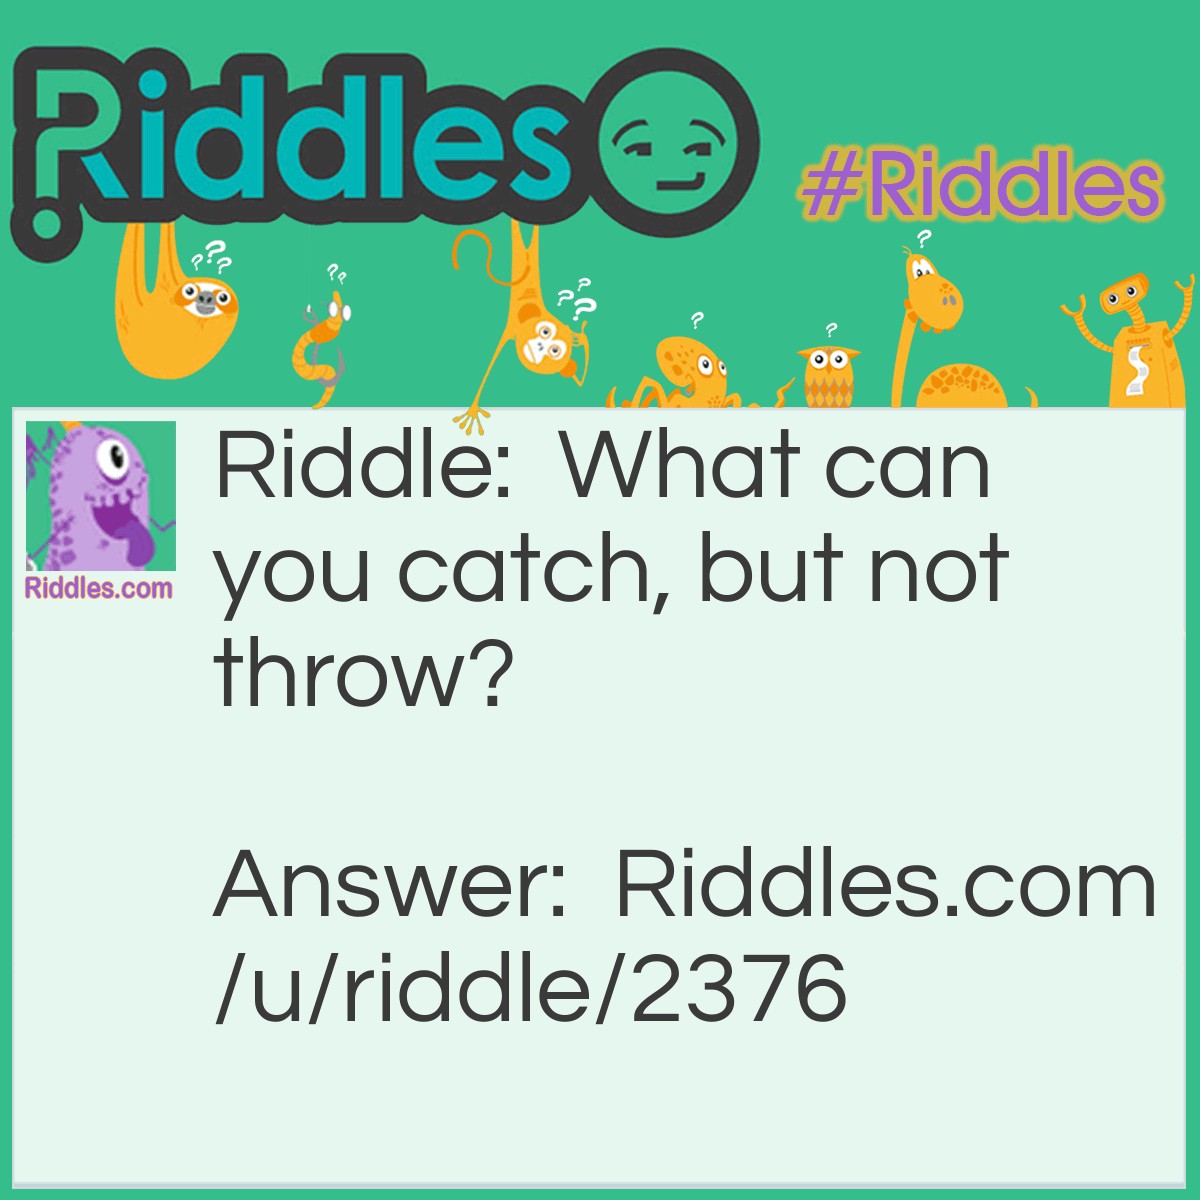 Riddle: What can you catch, but not throw? Answer: A cold.